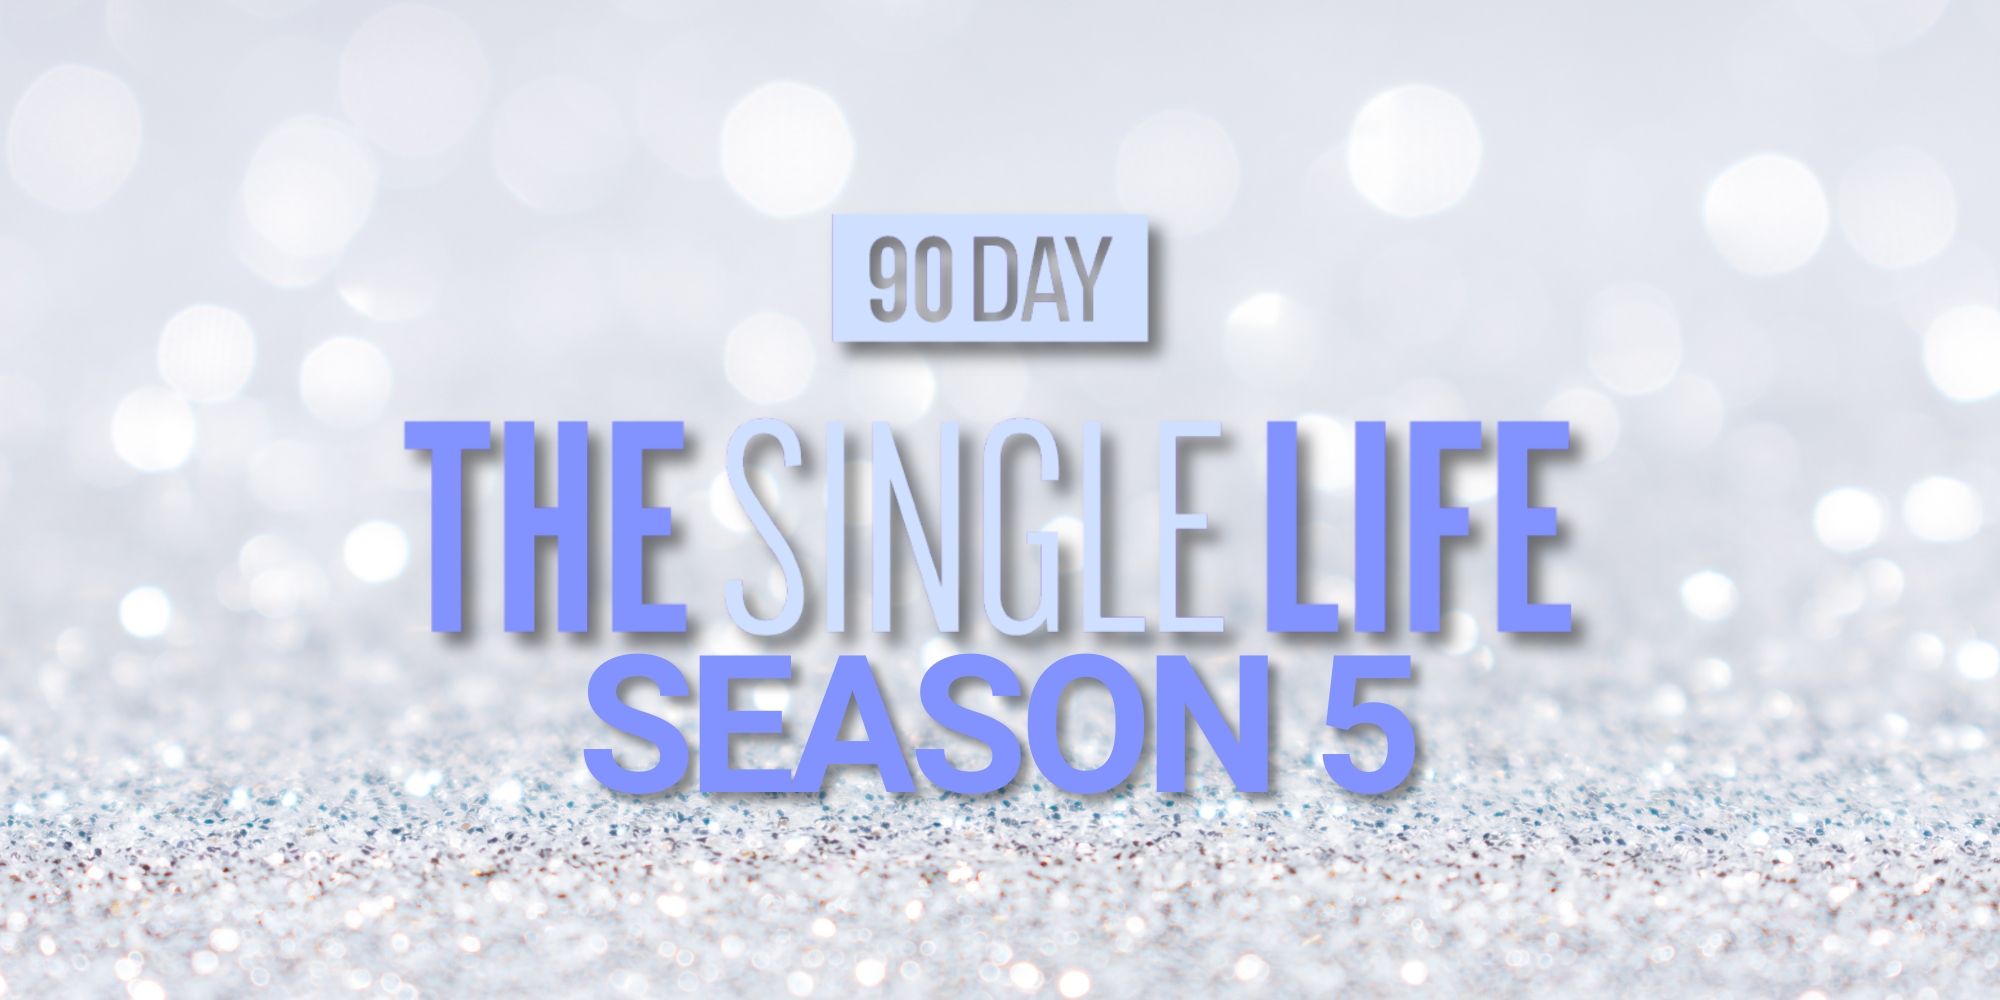 90 Day The Single Life Season 5 title card in silver and blue